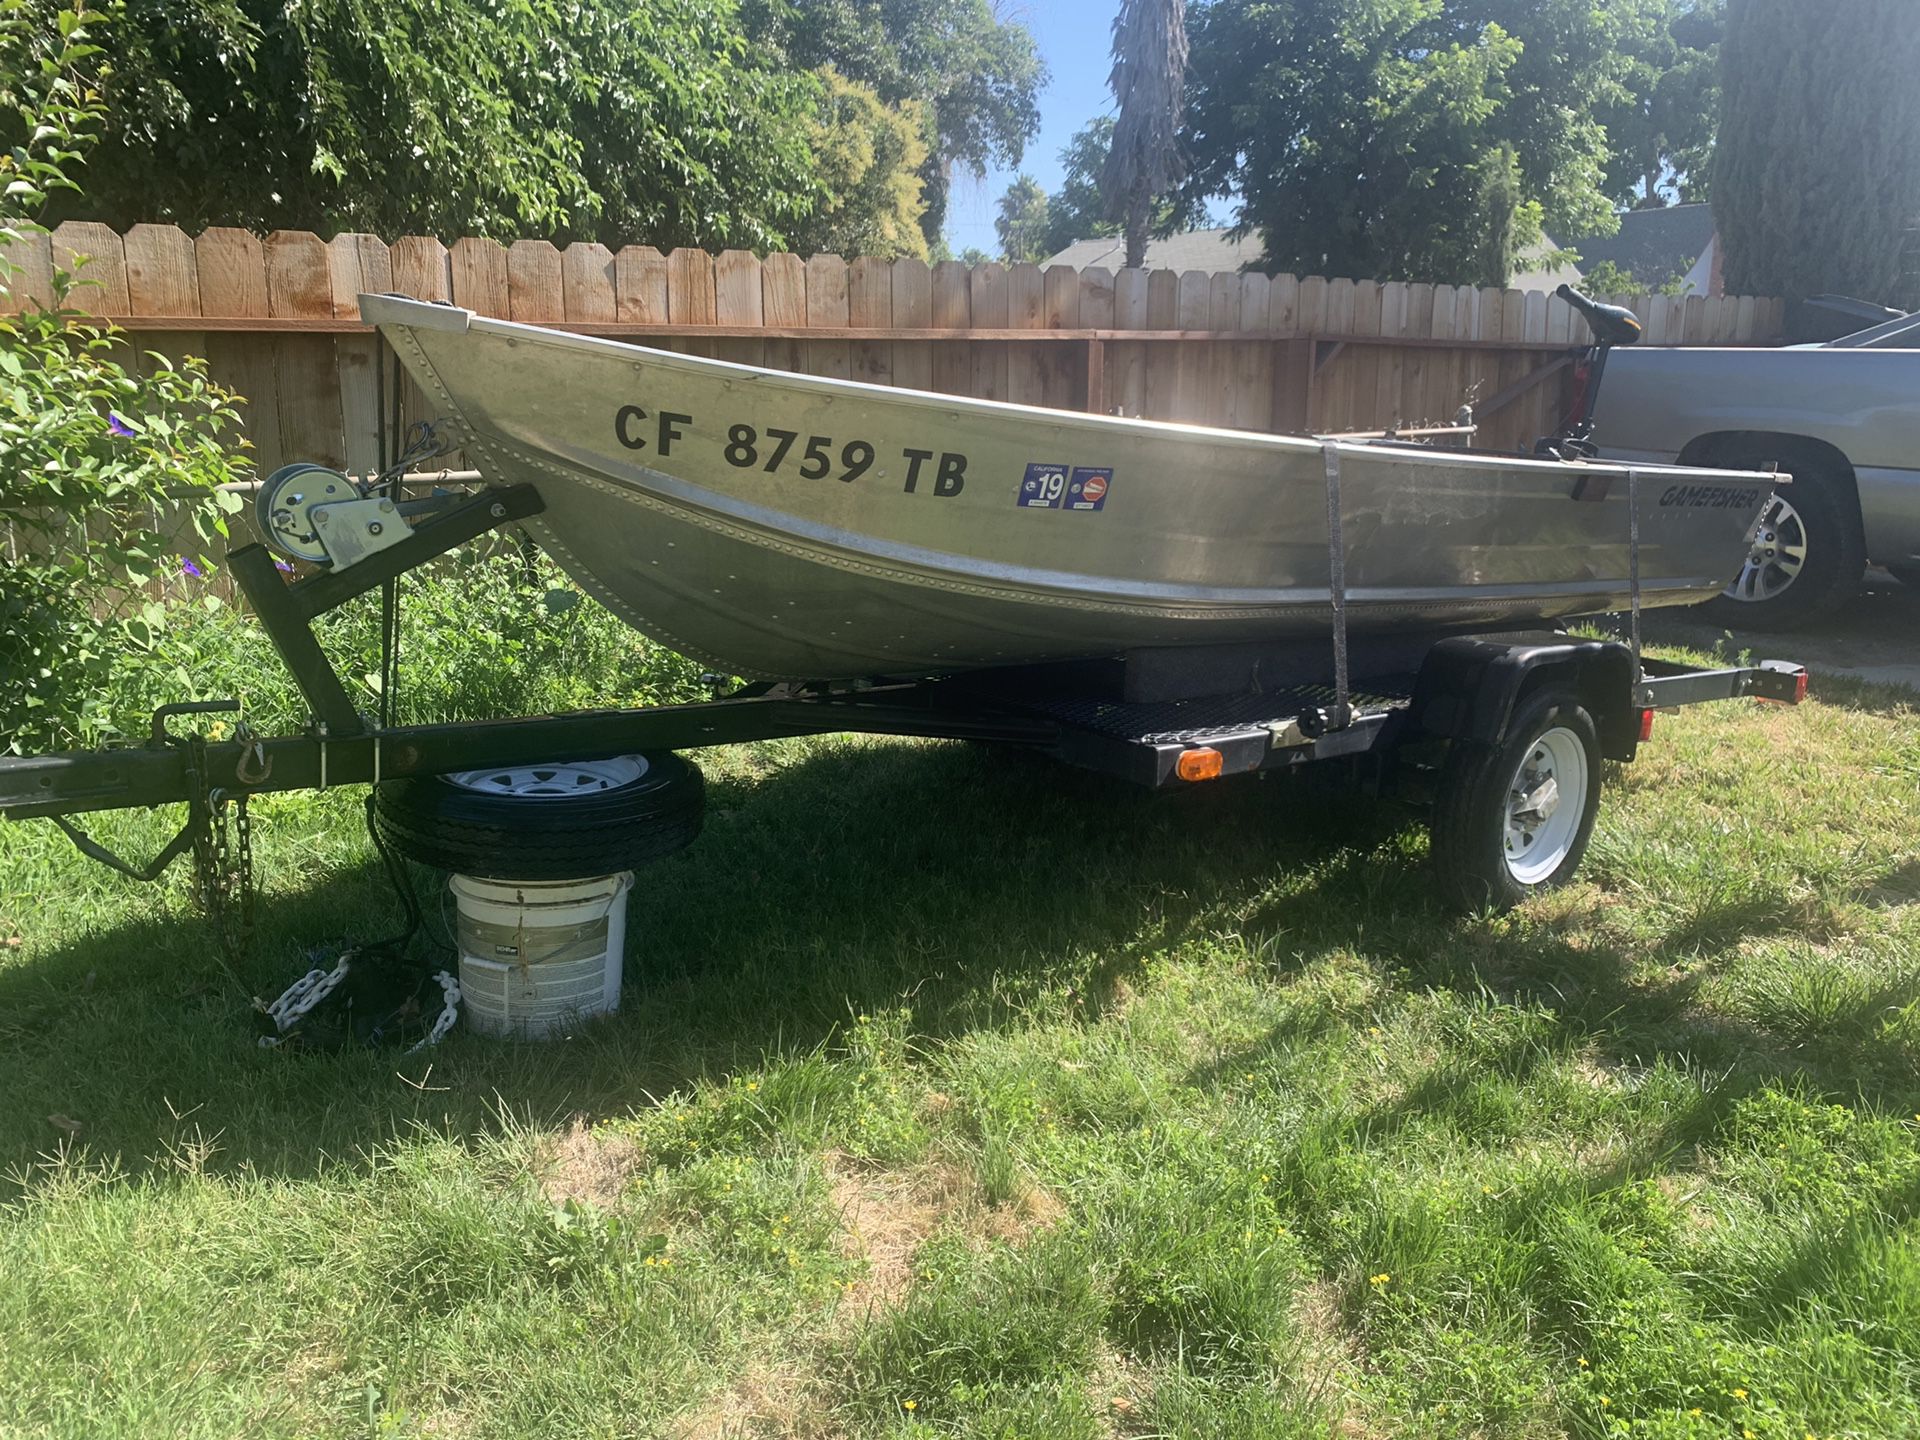 Sears 12ft aluminum V boat for Sale in Hayward, CA - OfferUp